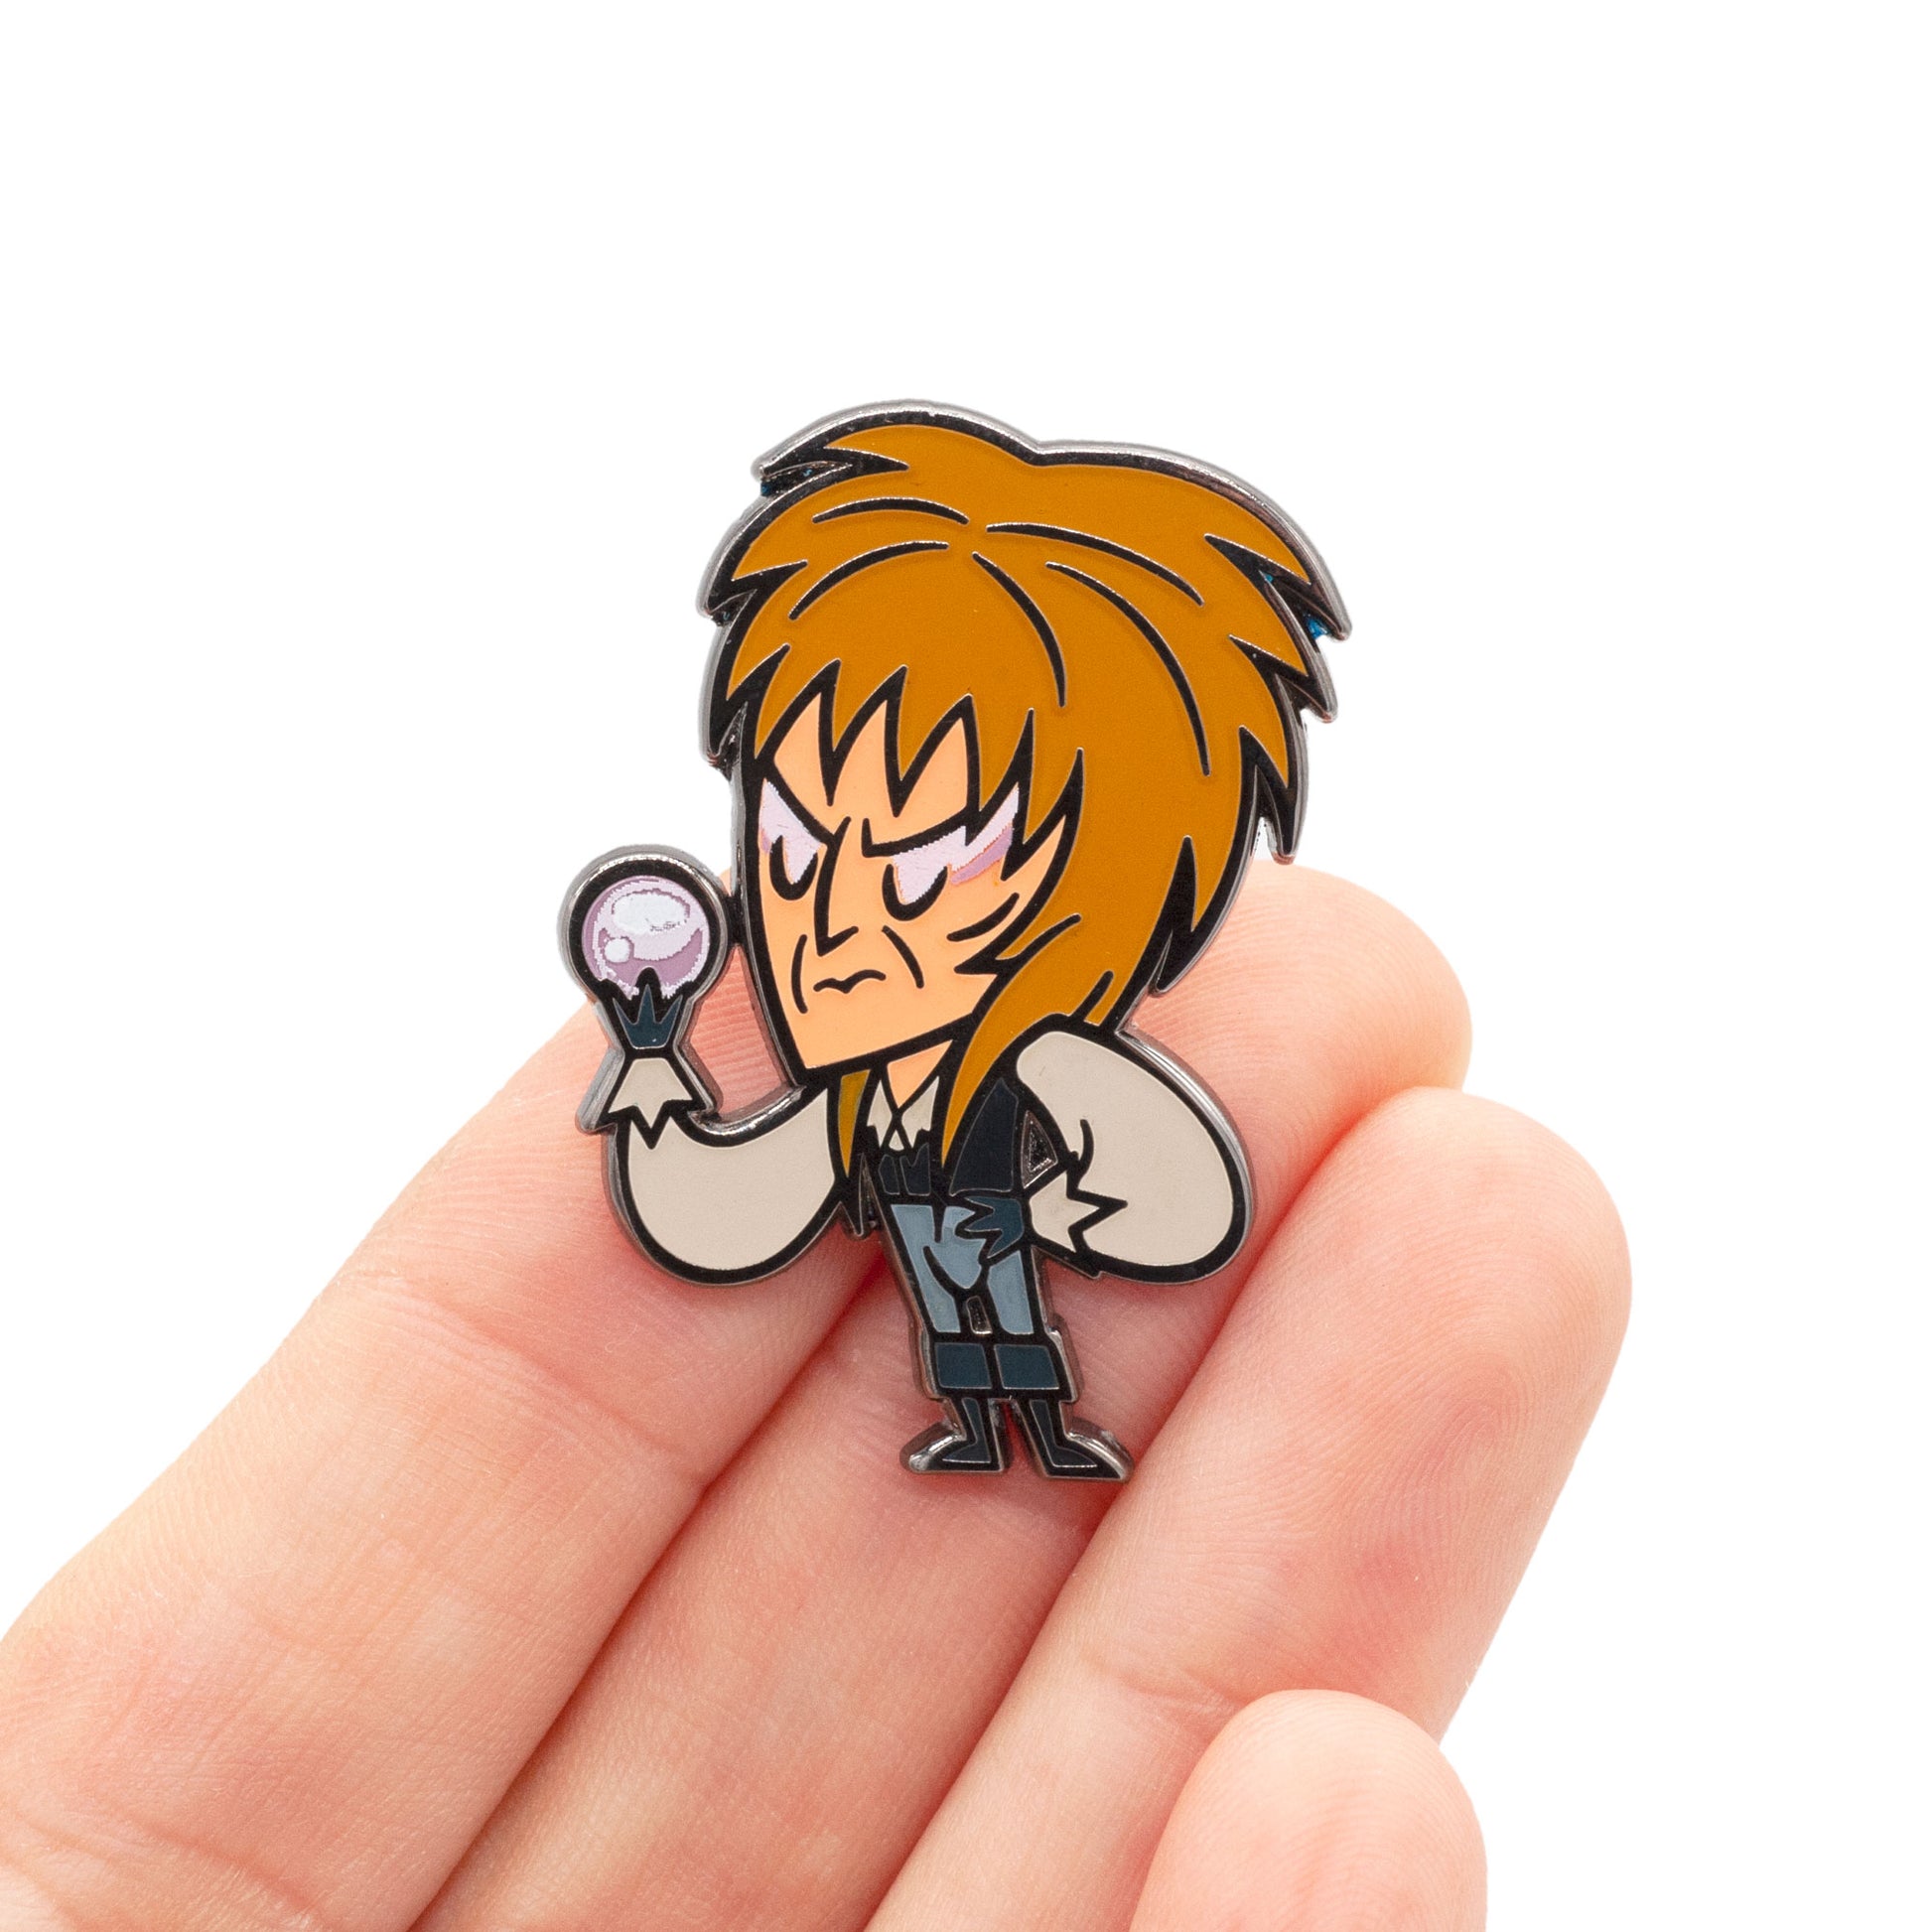 the goblin king lapel pin being held by hand to show scale.